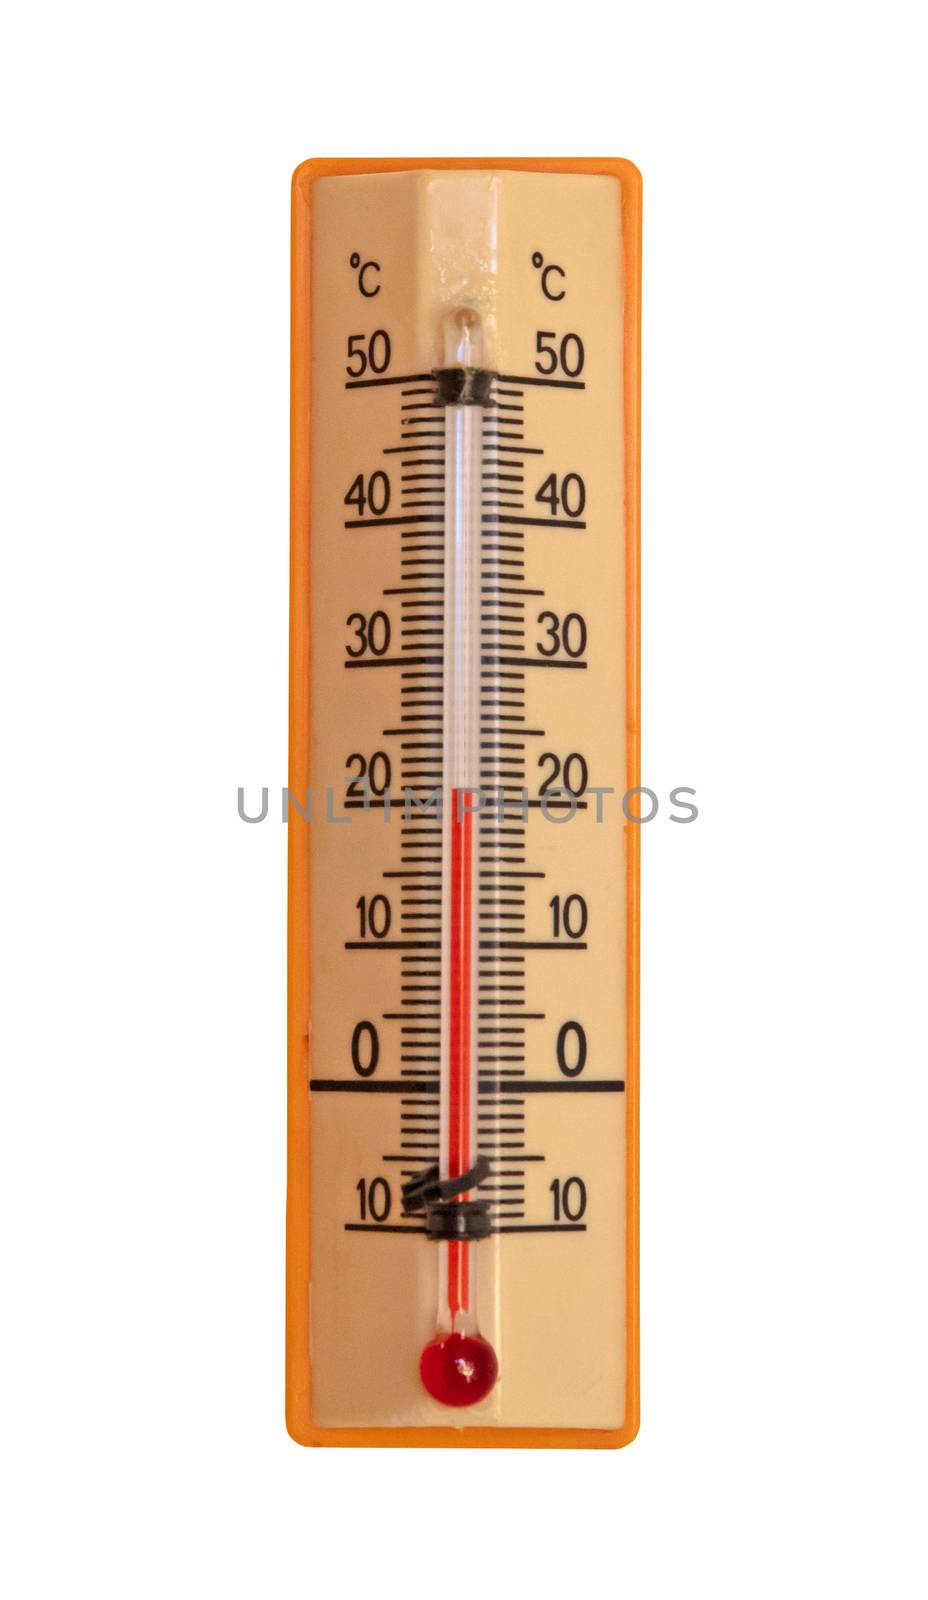 Imagine showing a plastic thermometer used to see outside temperature